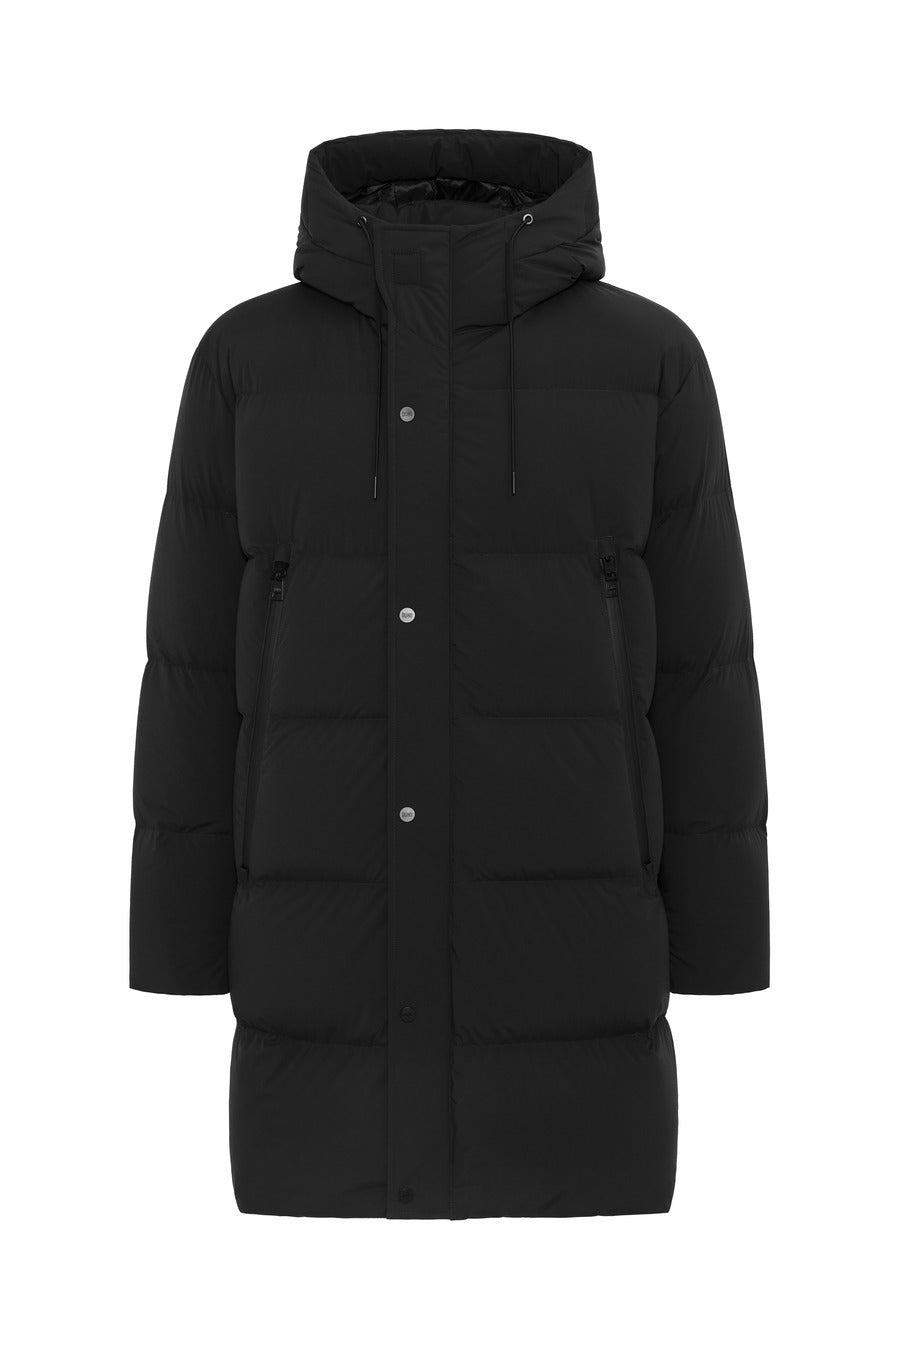 HYPERONE L - HOODED PACKABLE LONG PARKA IN BI-STRETCH TECHNICAL